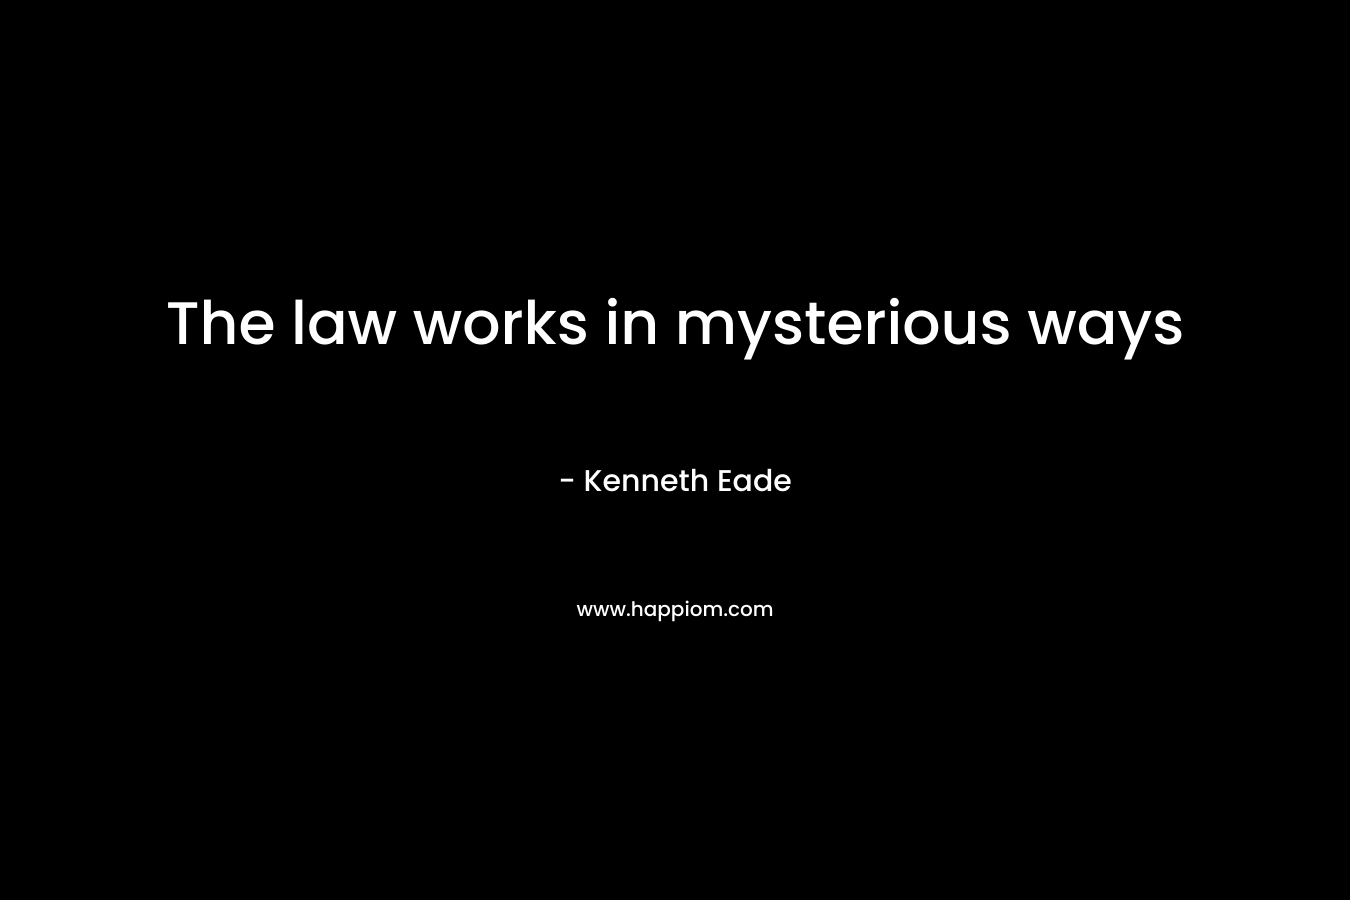 The law works in mysterious ways – Kenneth Eade